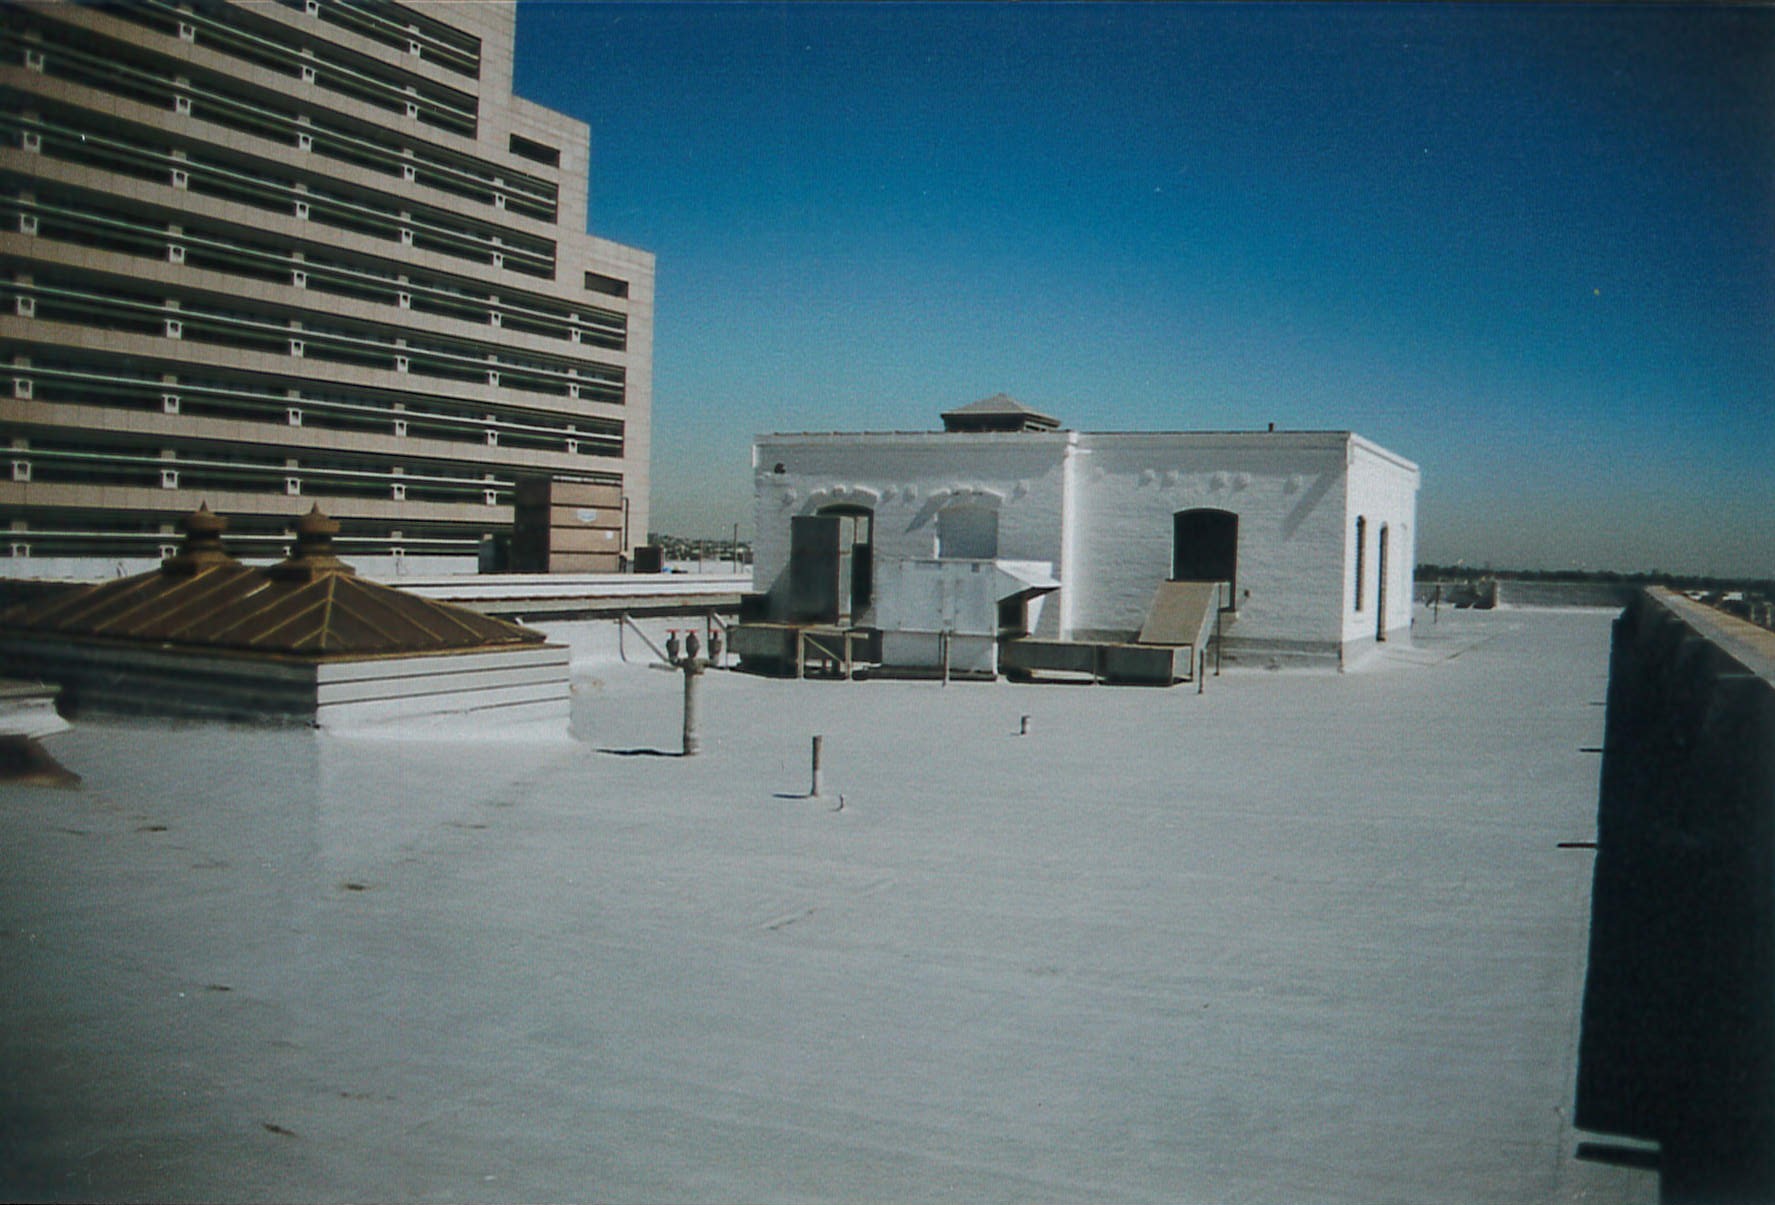 Roof view looking east